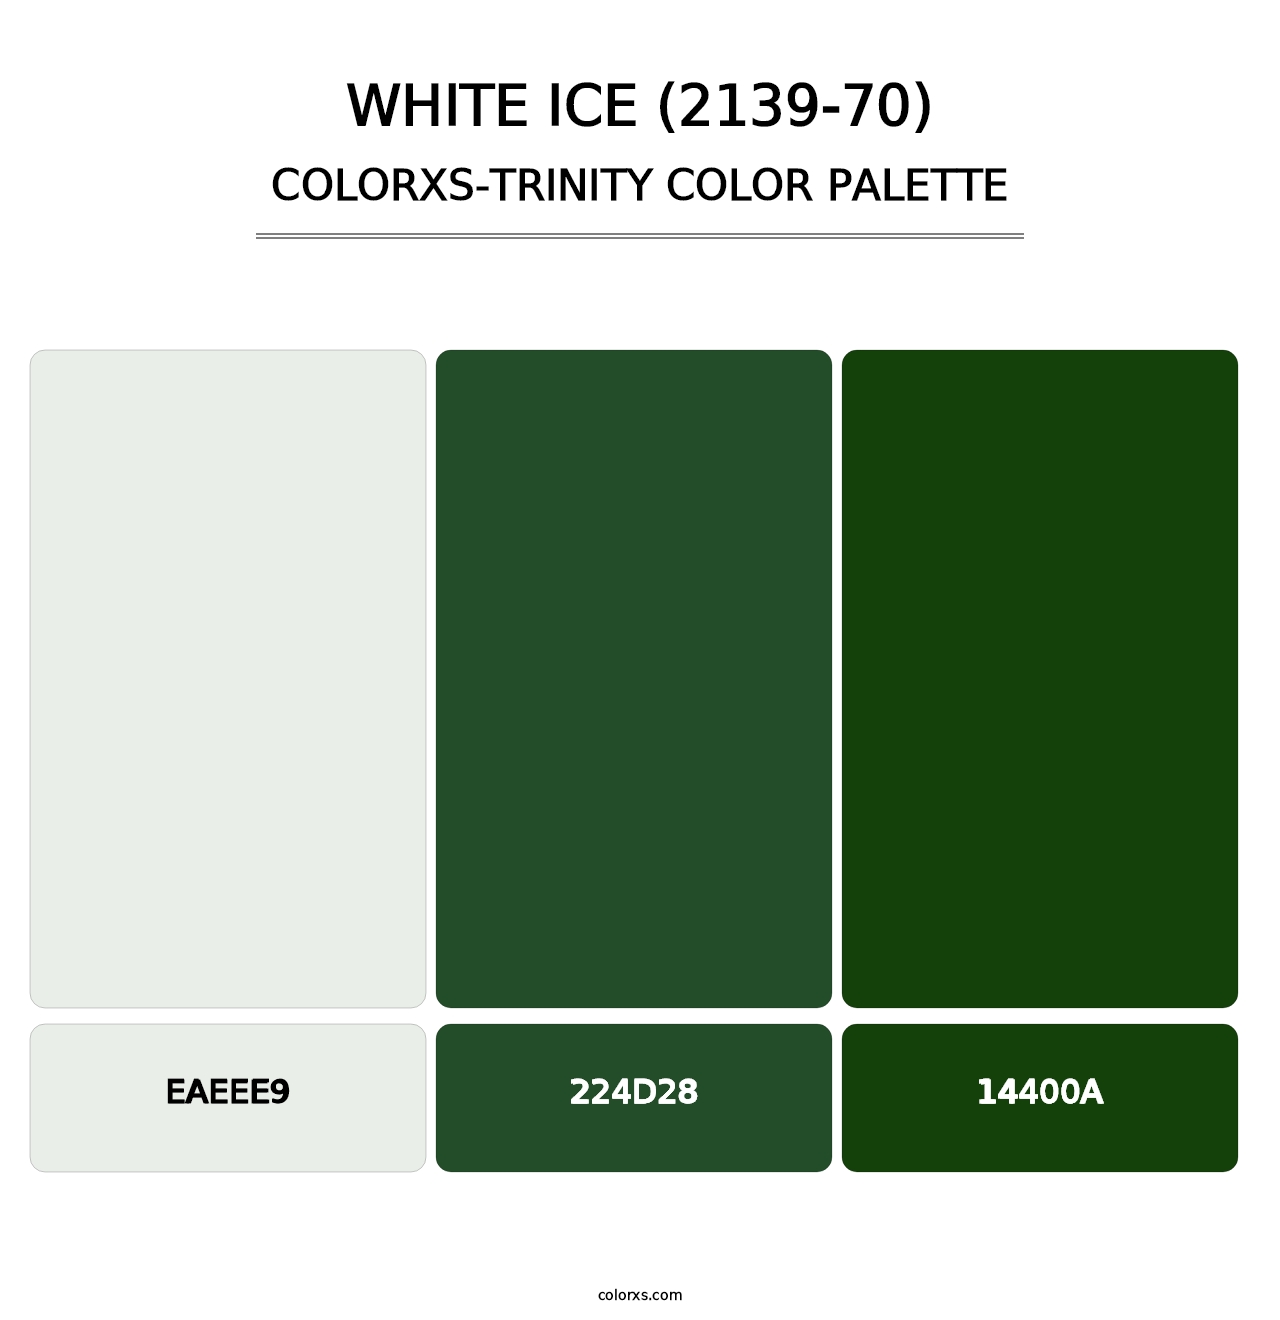 White Ice (2139-70) - Colorxs Trinity Palette